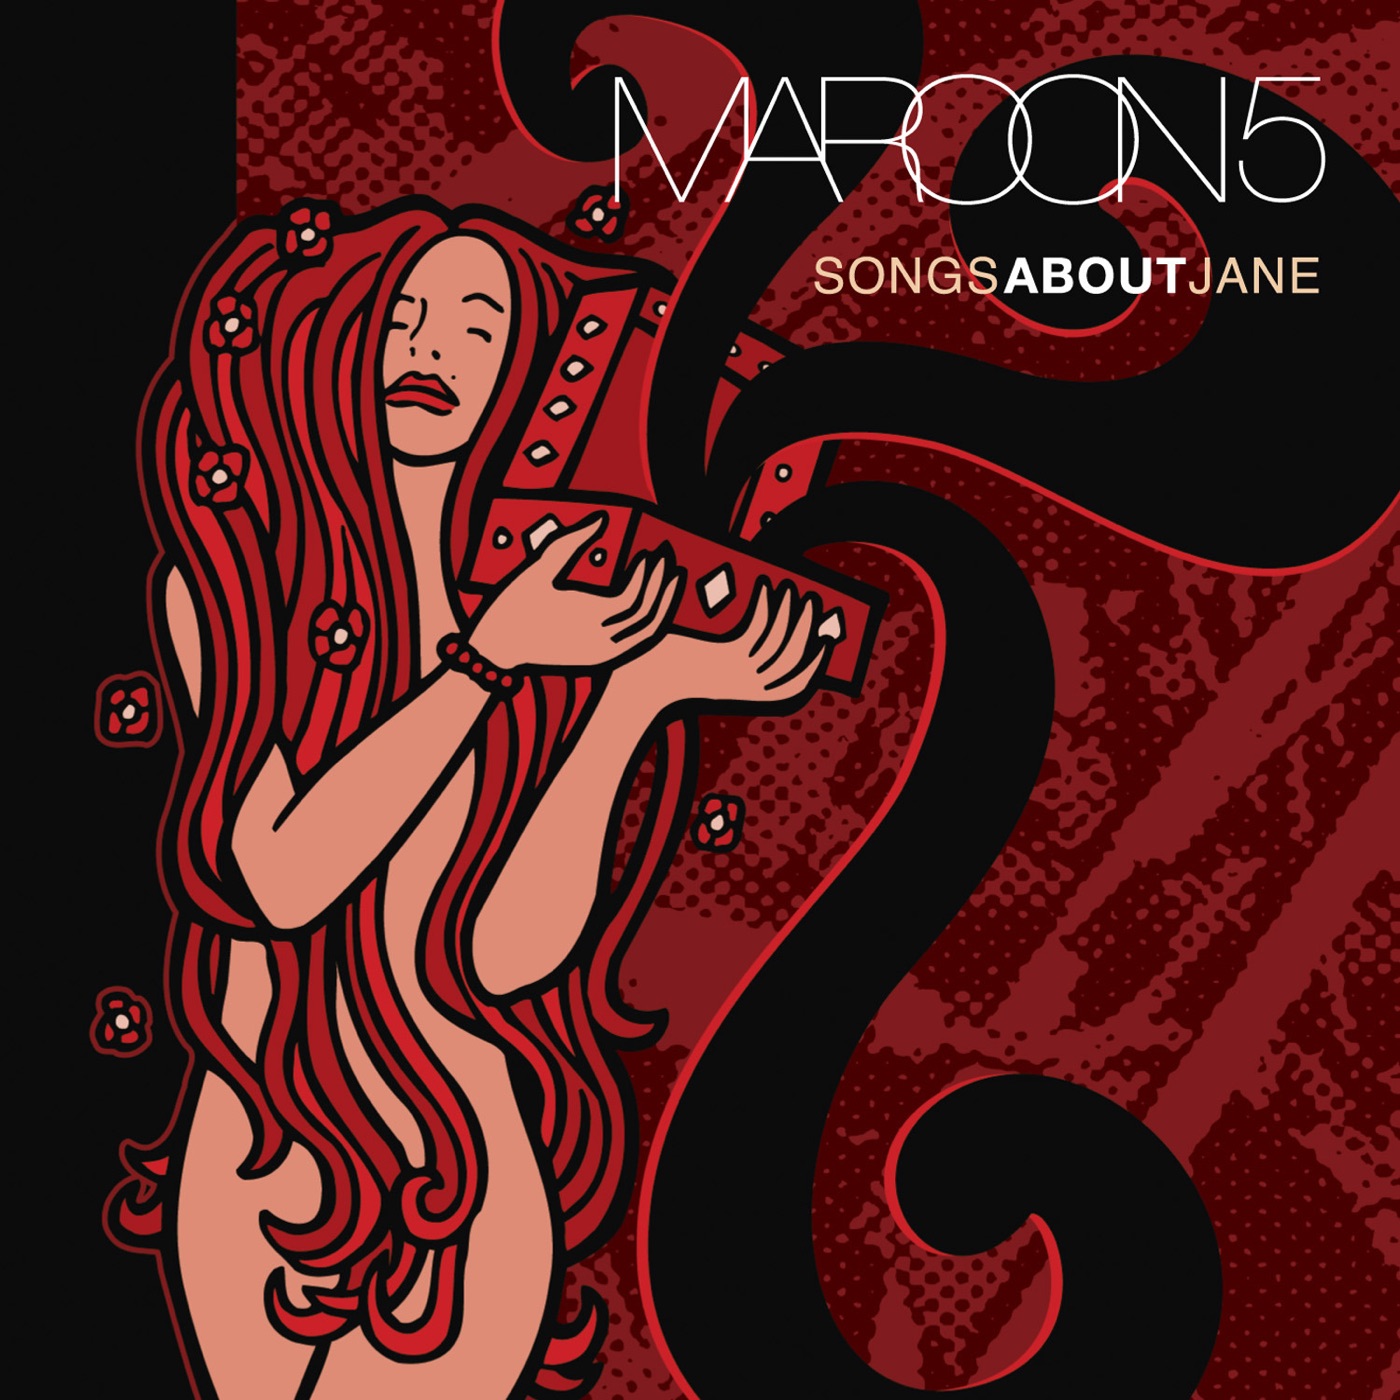 Songs About Jane by Maroon 5